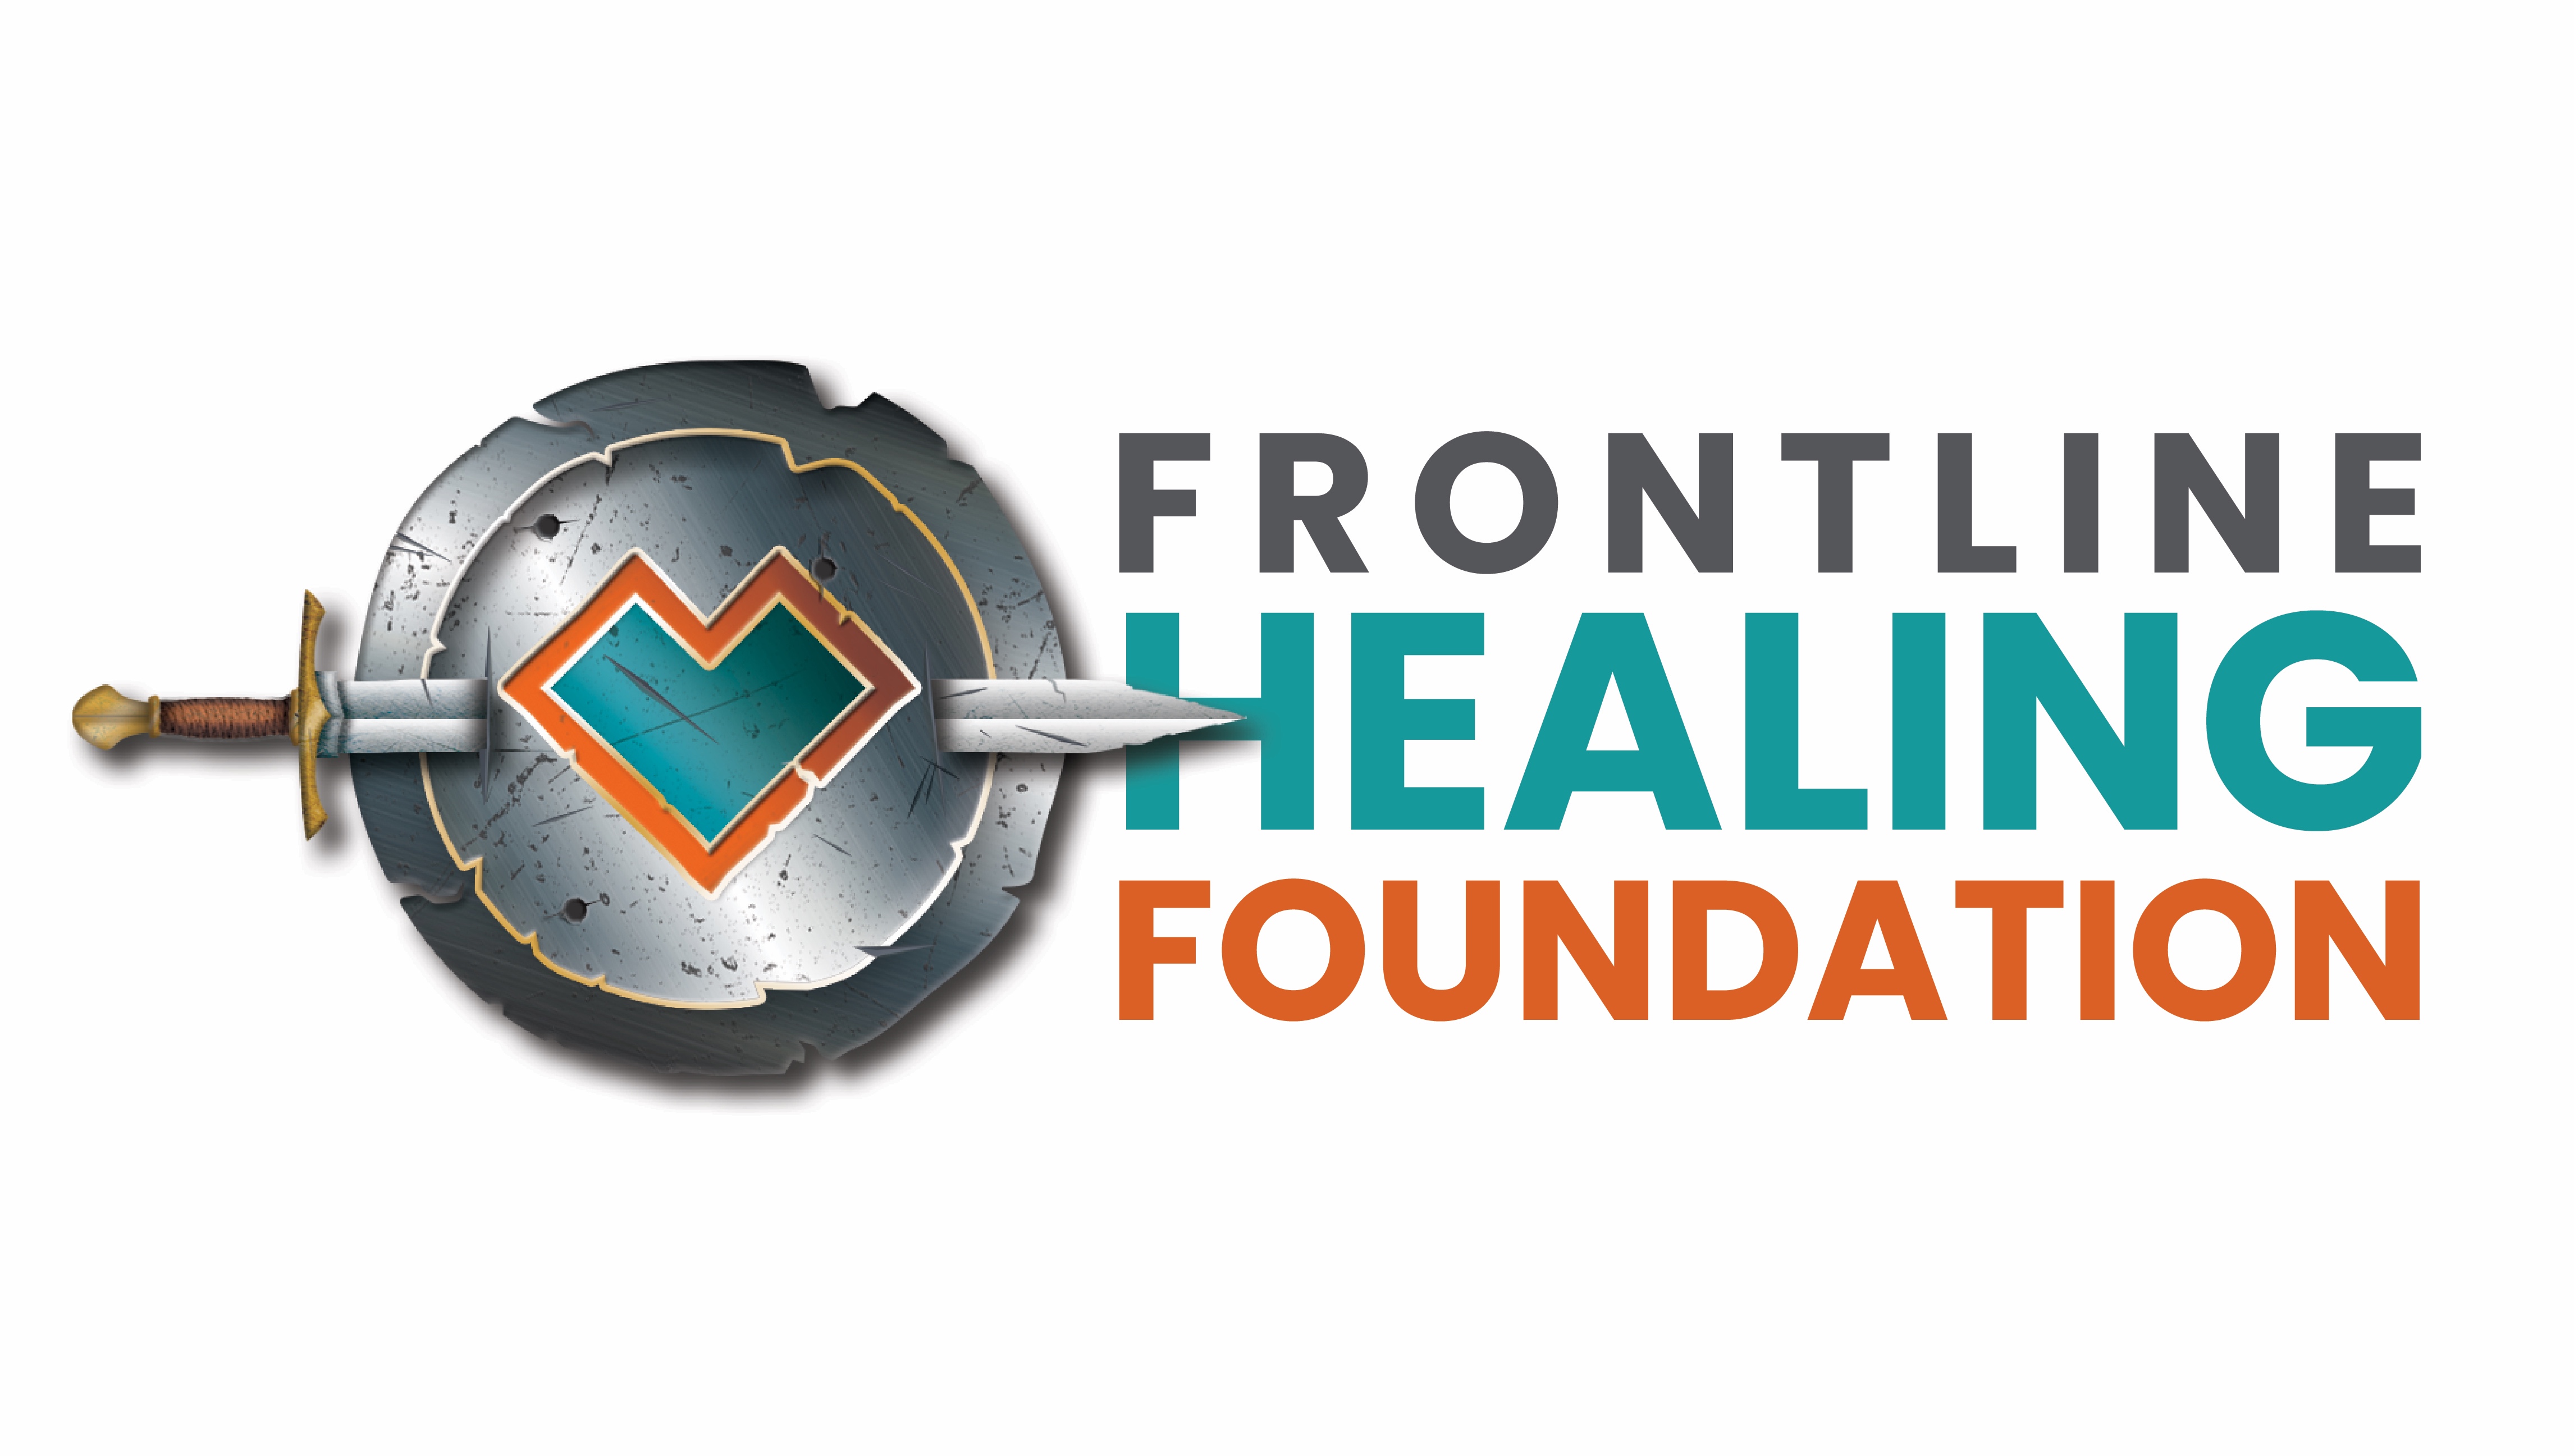 Operation Warriors Heart Foundation is NOW the Frontline Healing Foundation, a 501(c)(3) that supports healing for military, veterans and first responders.